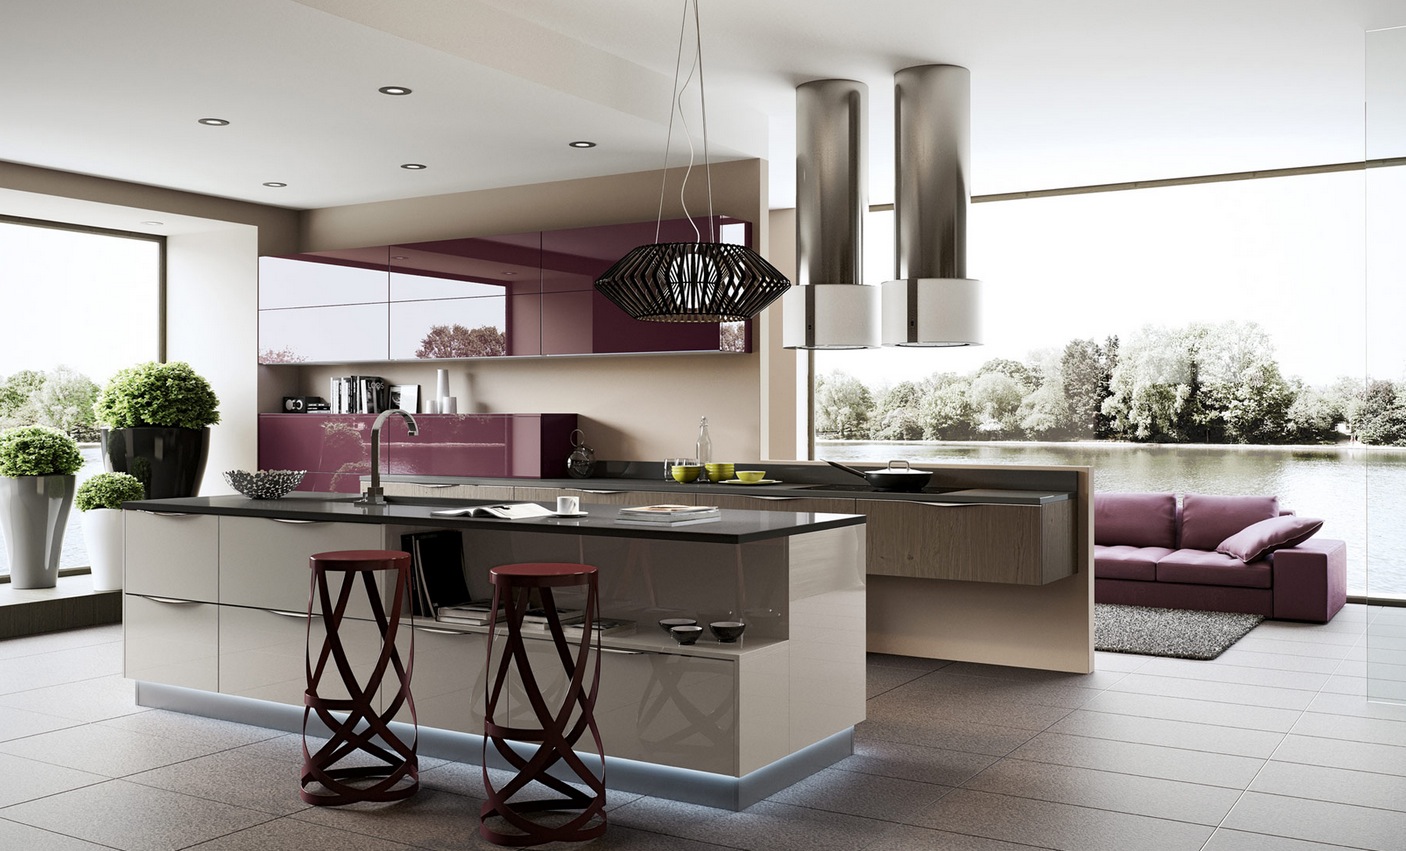 Suitable To Apply Modern Kitchen Designs Combined With Contemporary